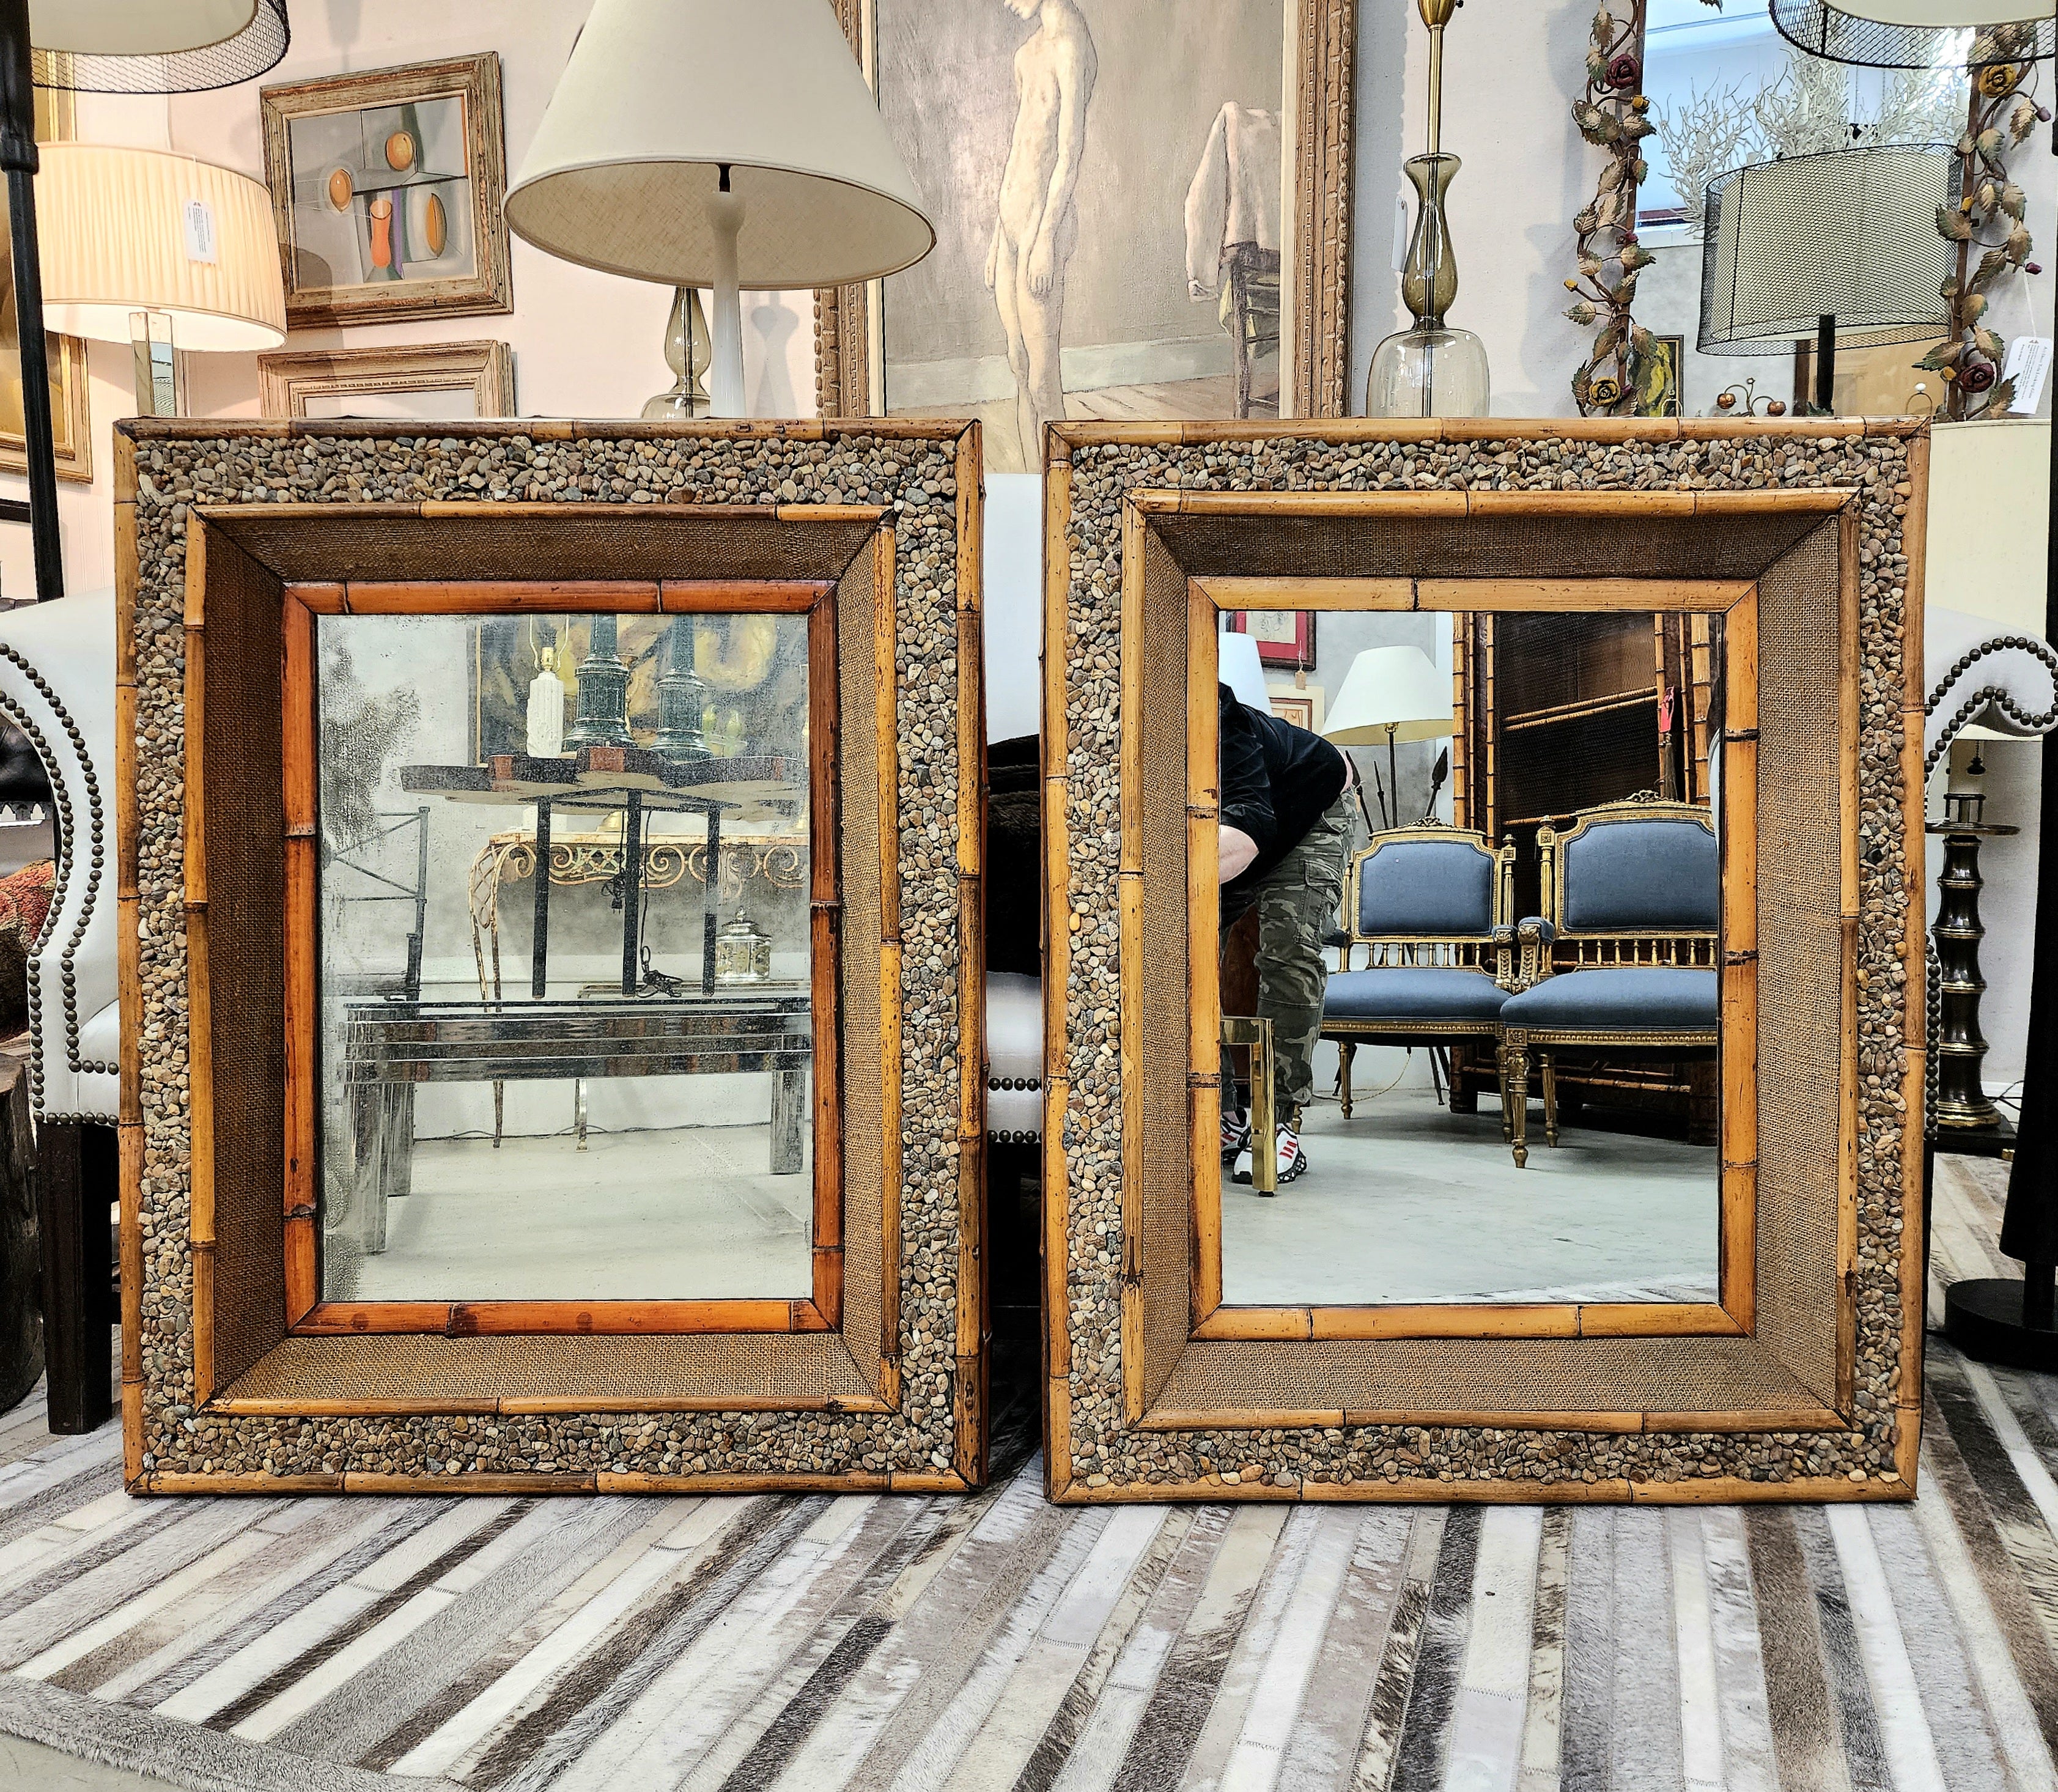 Very handsome pair of exceptional bamboo and pebble stone mirrors.
Circa 1940's, just full of character and texture.
Perfect for a master bathroom Suite or a pair of console tables. All bamboo and textured surfaces are original.

